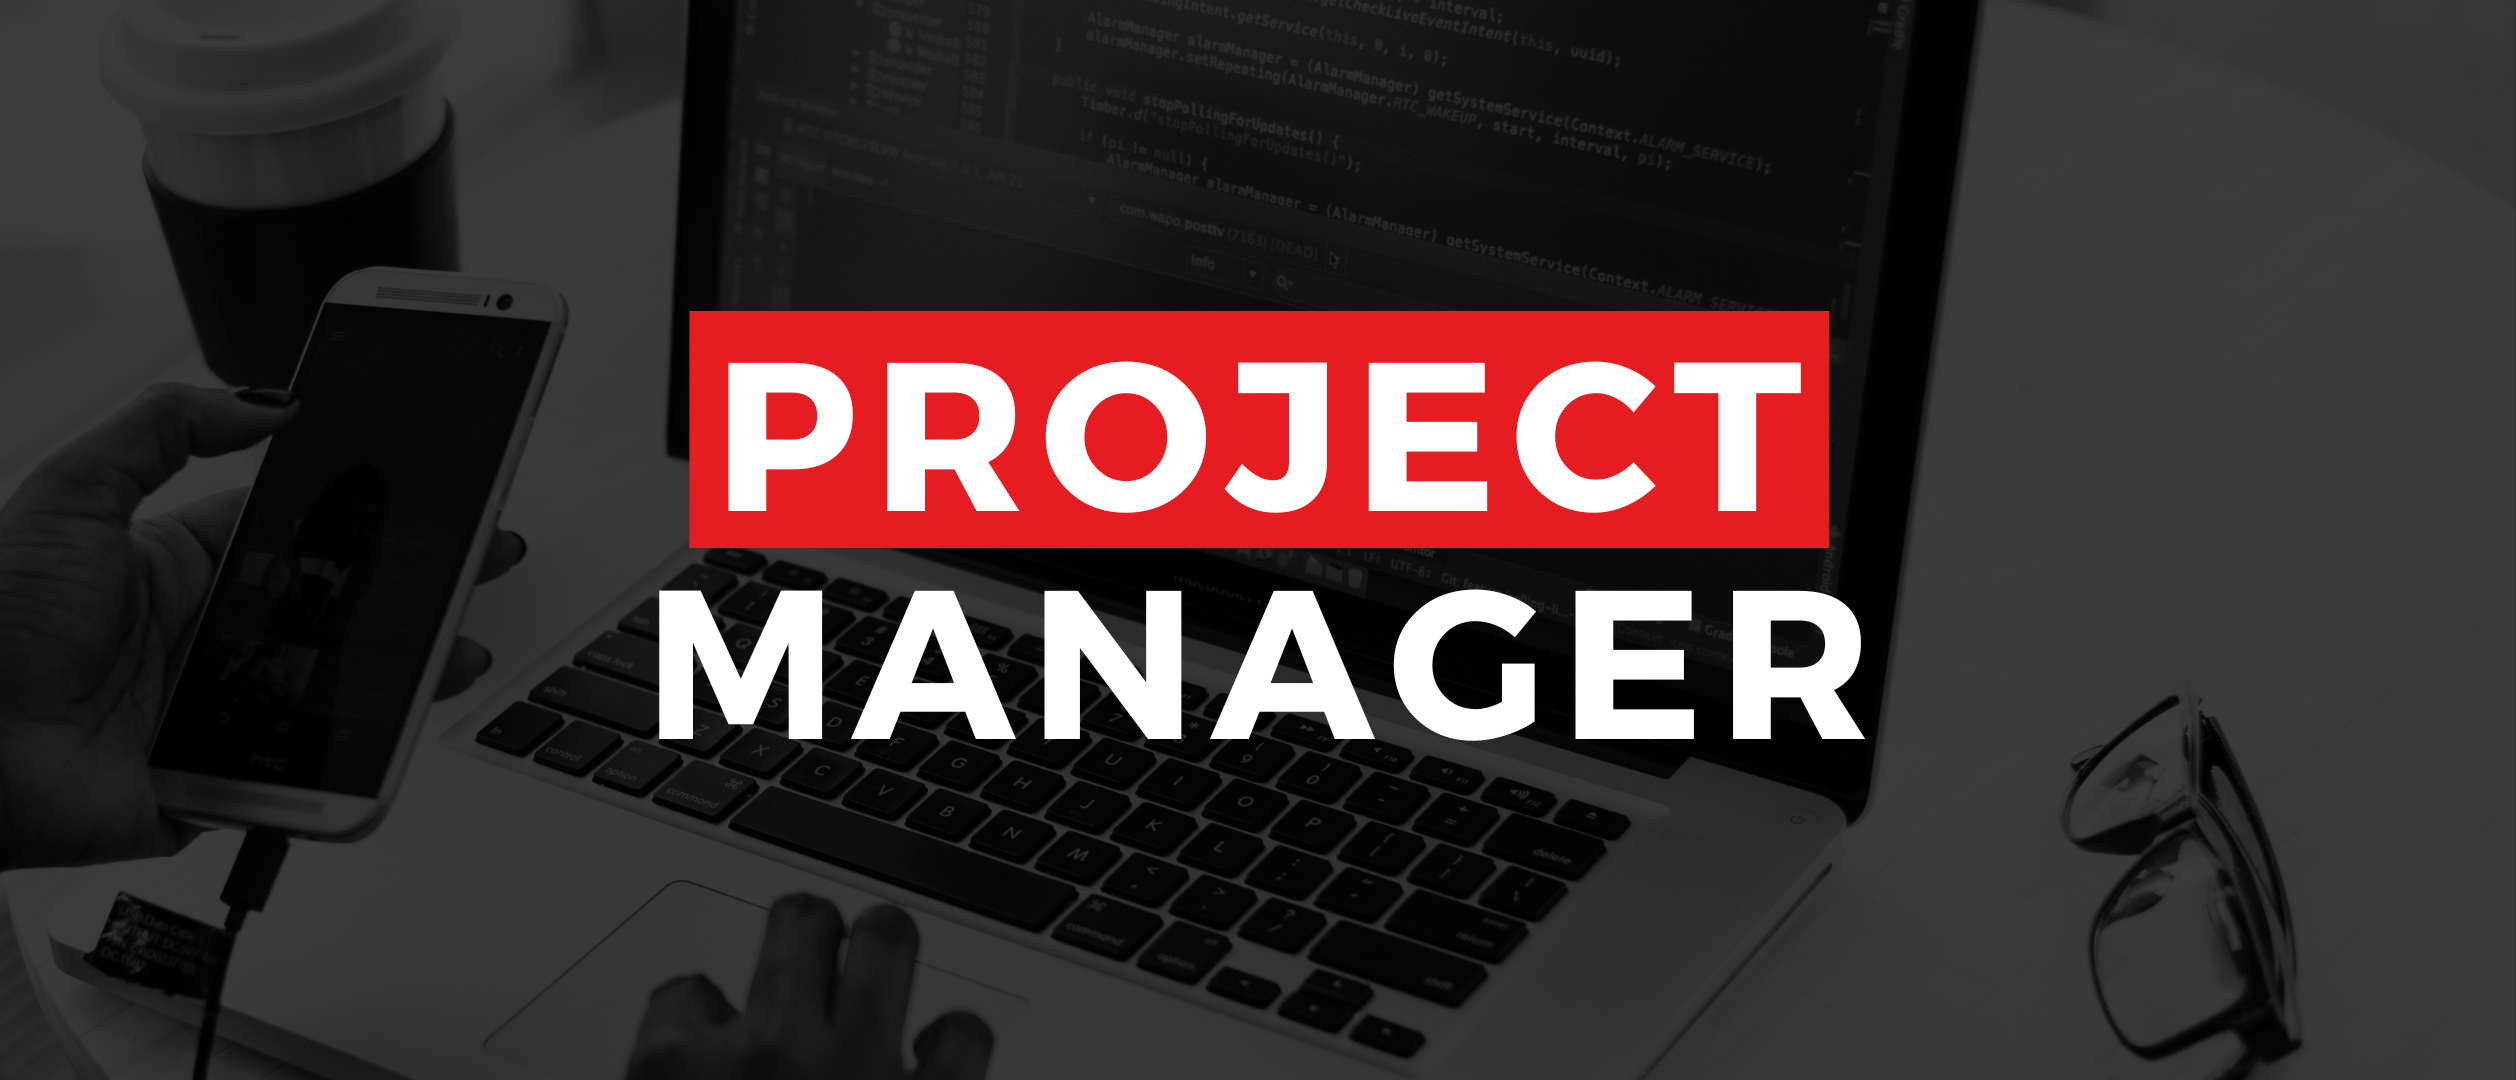 Vacante Project Manager